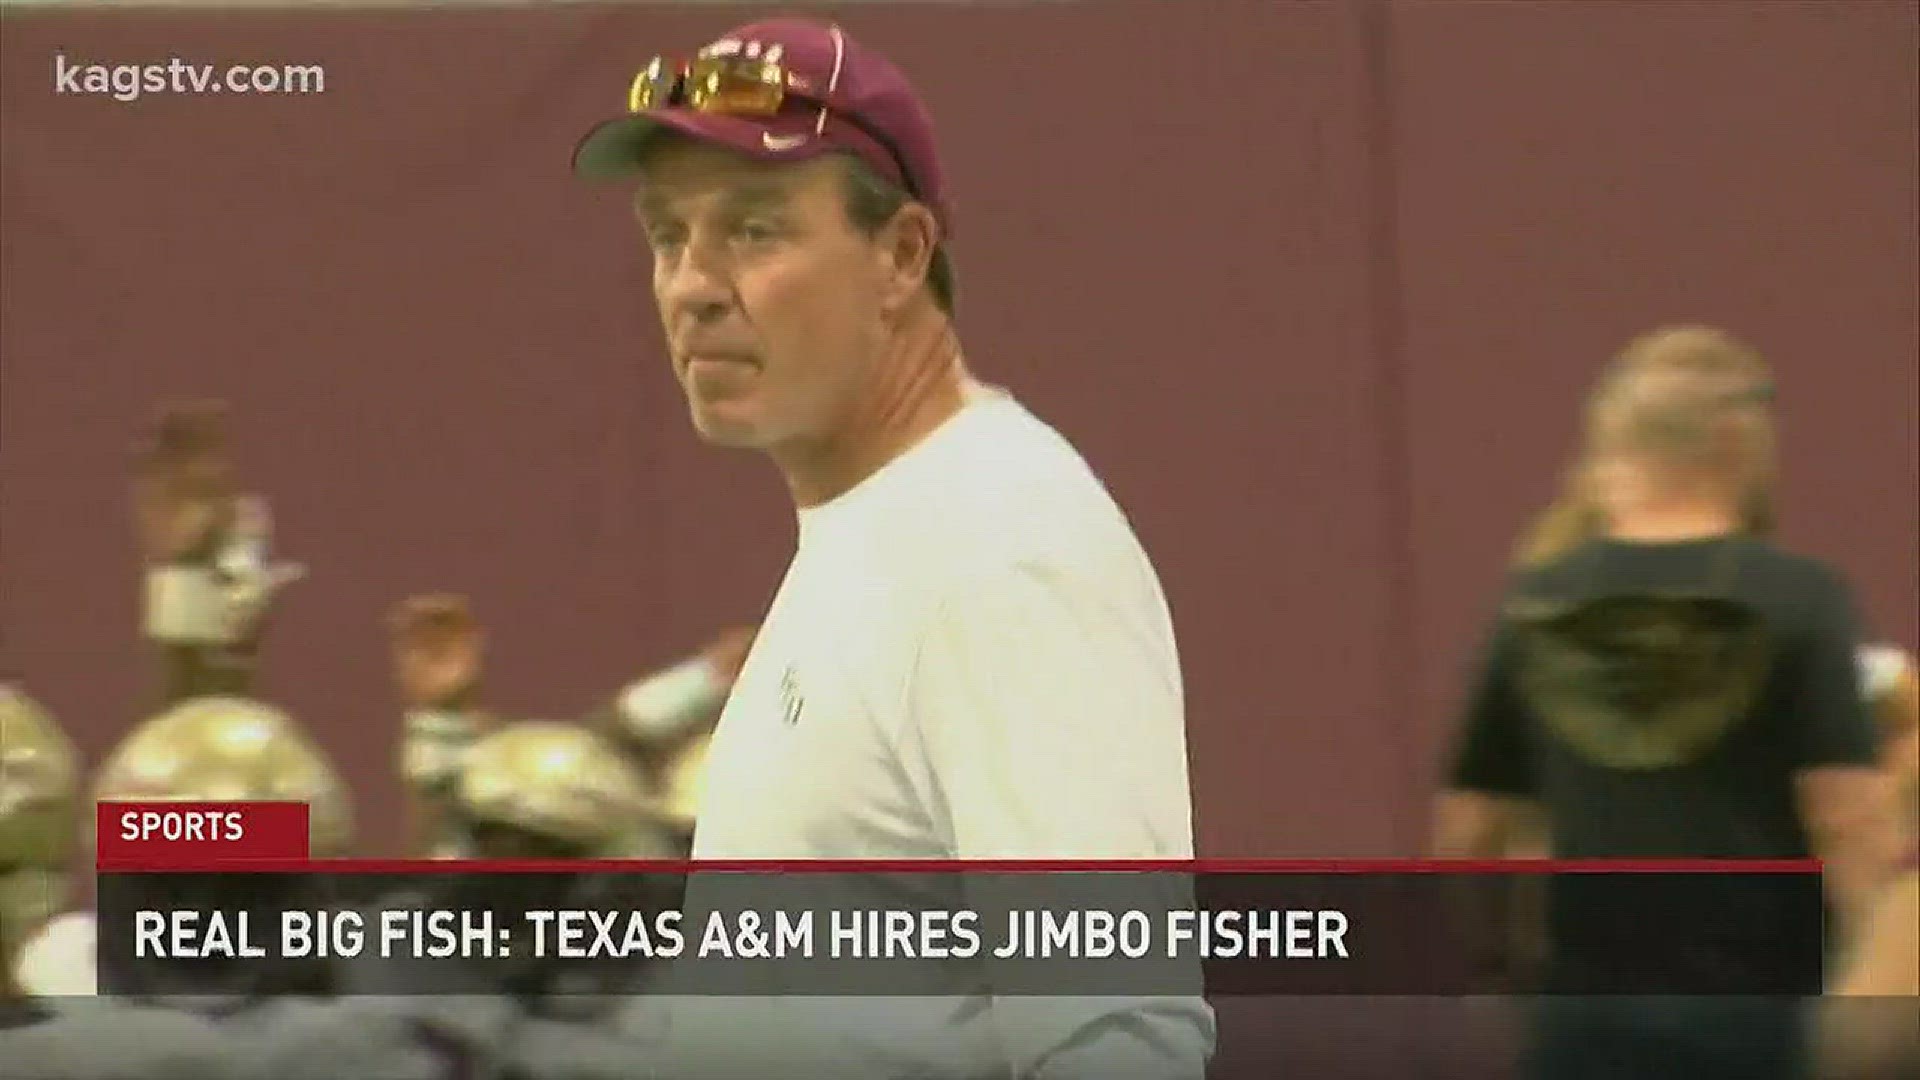 With Jimbo Fisher coming to Texas A&M, expectations will get even bigger for the Aggies.